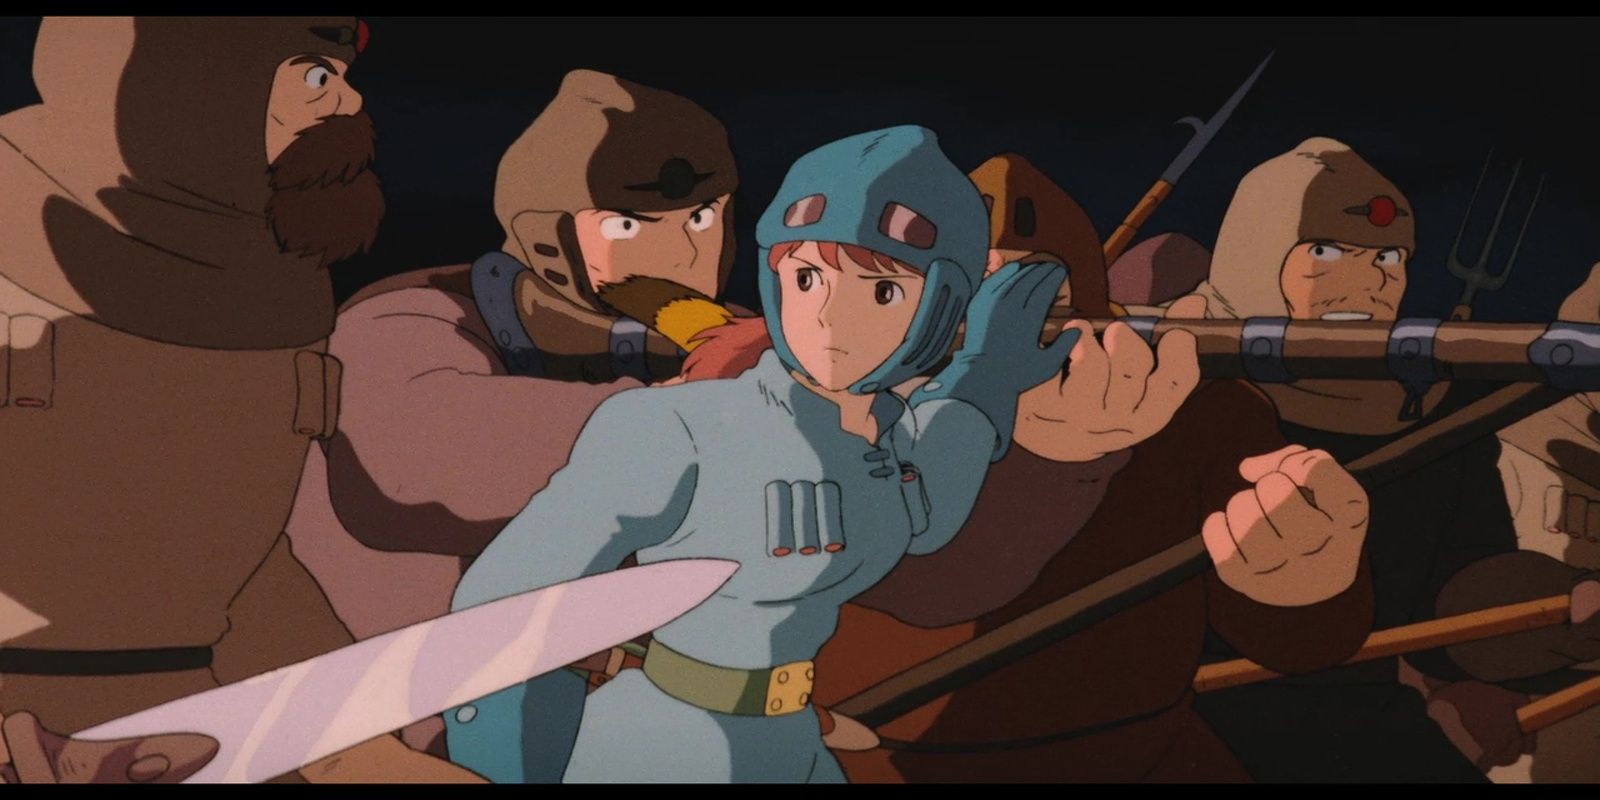 Soldiers and villagers armed and running with Nausicaa in the Studio Ghibli film